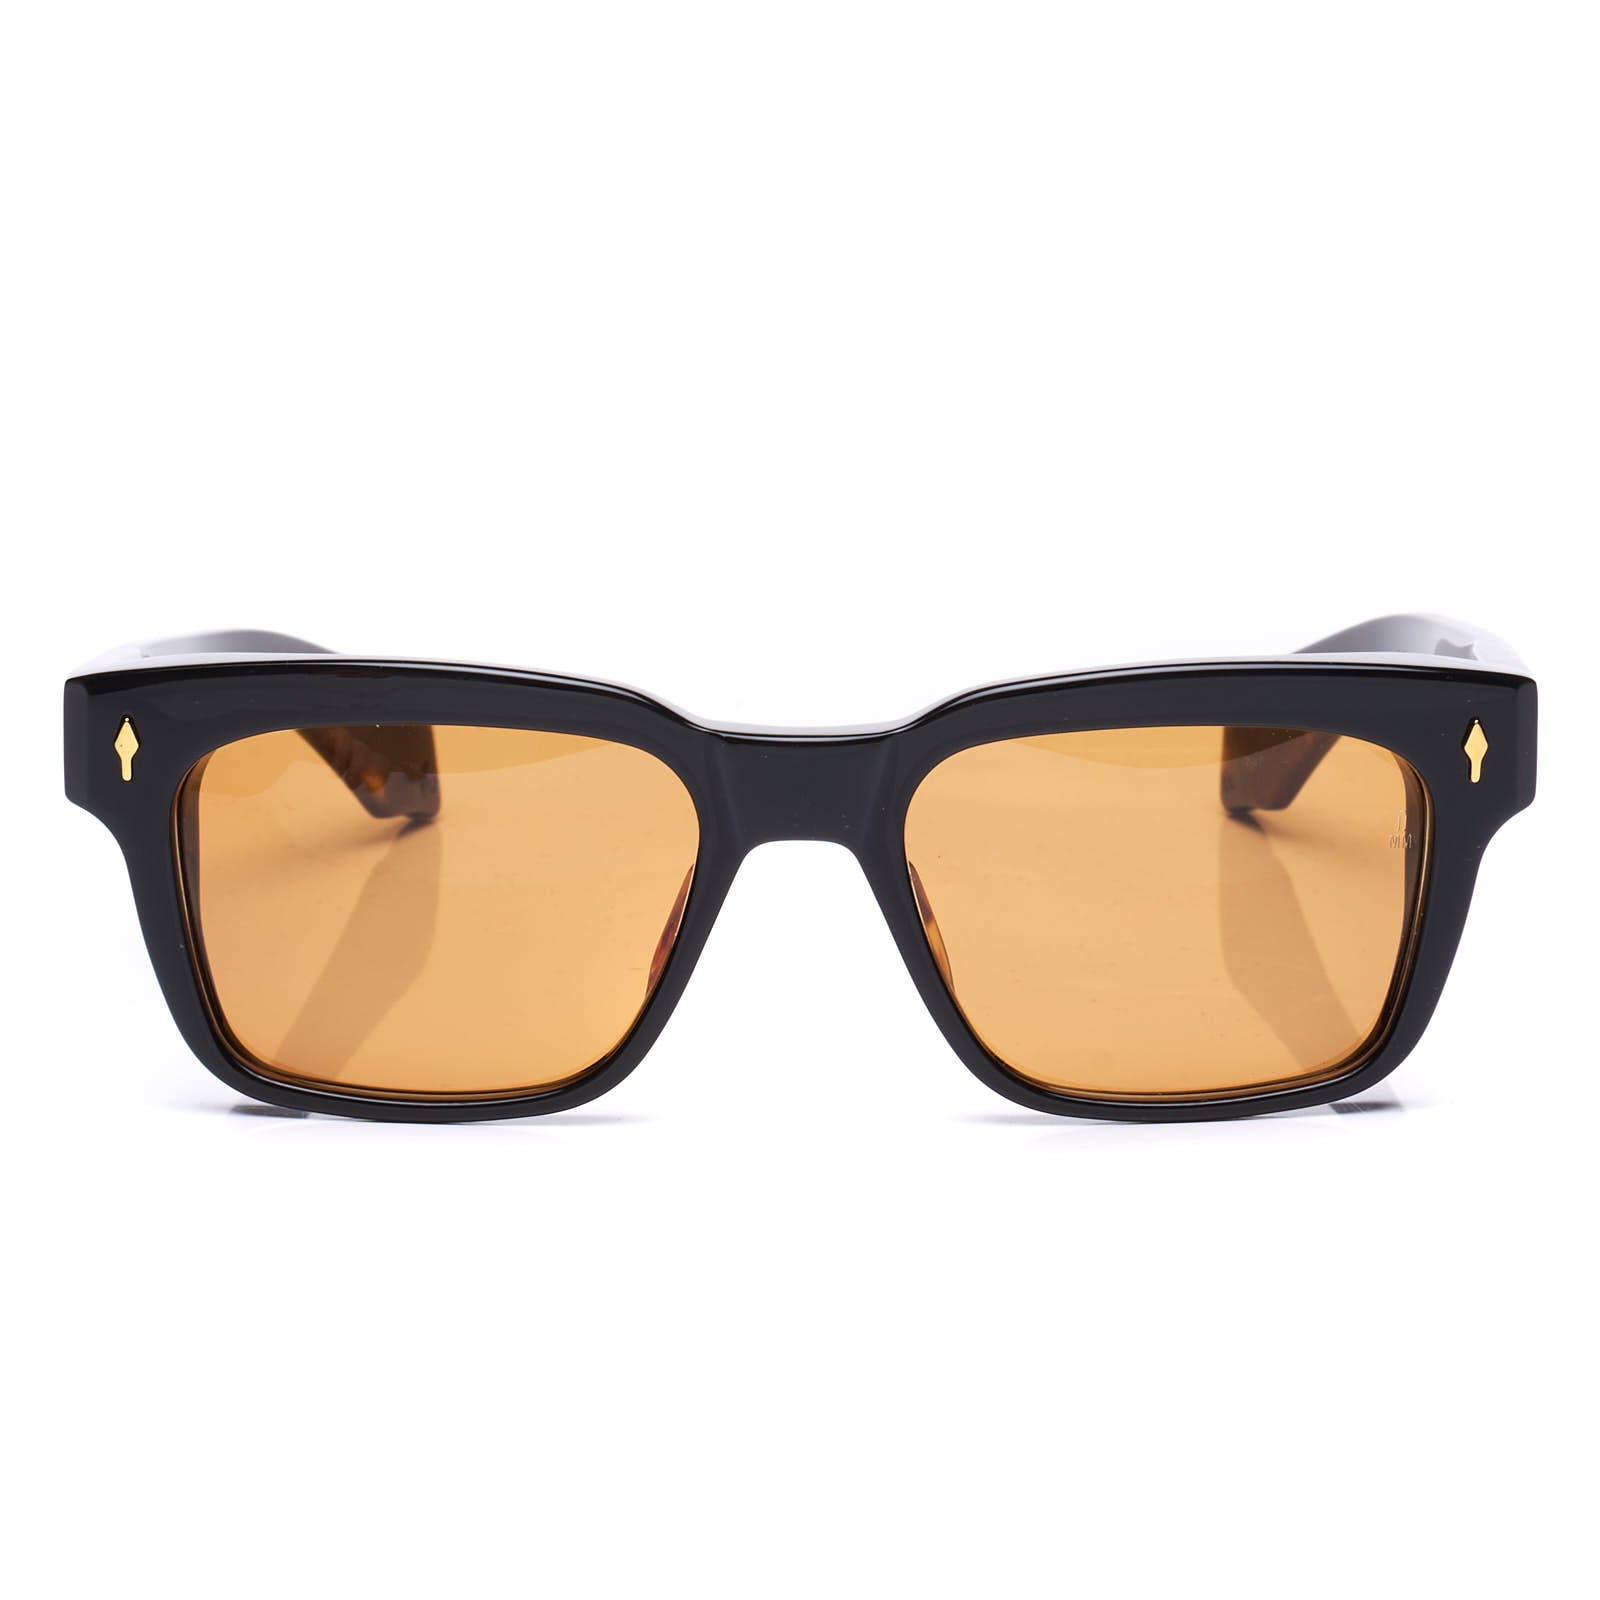 JACQUES MARIE MAGE JMMML2A MOLINO Super Limited Edition 2 of 15 Sunglasses